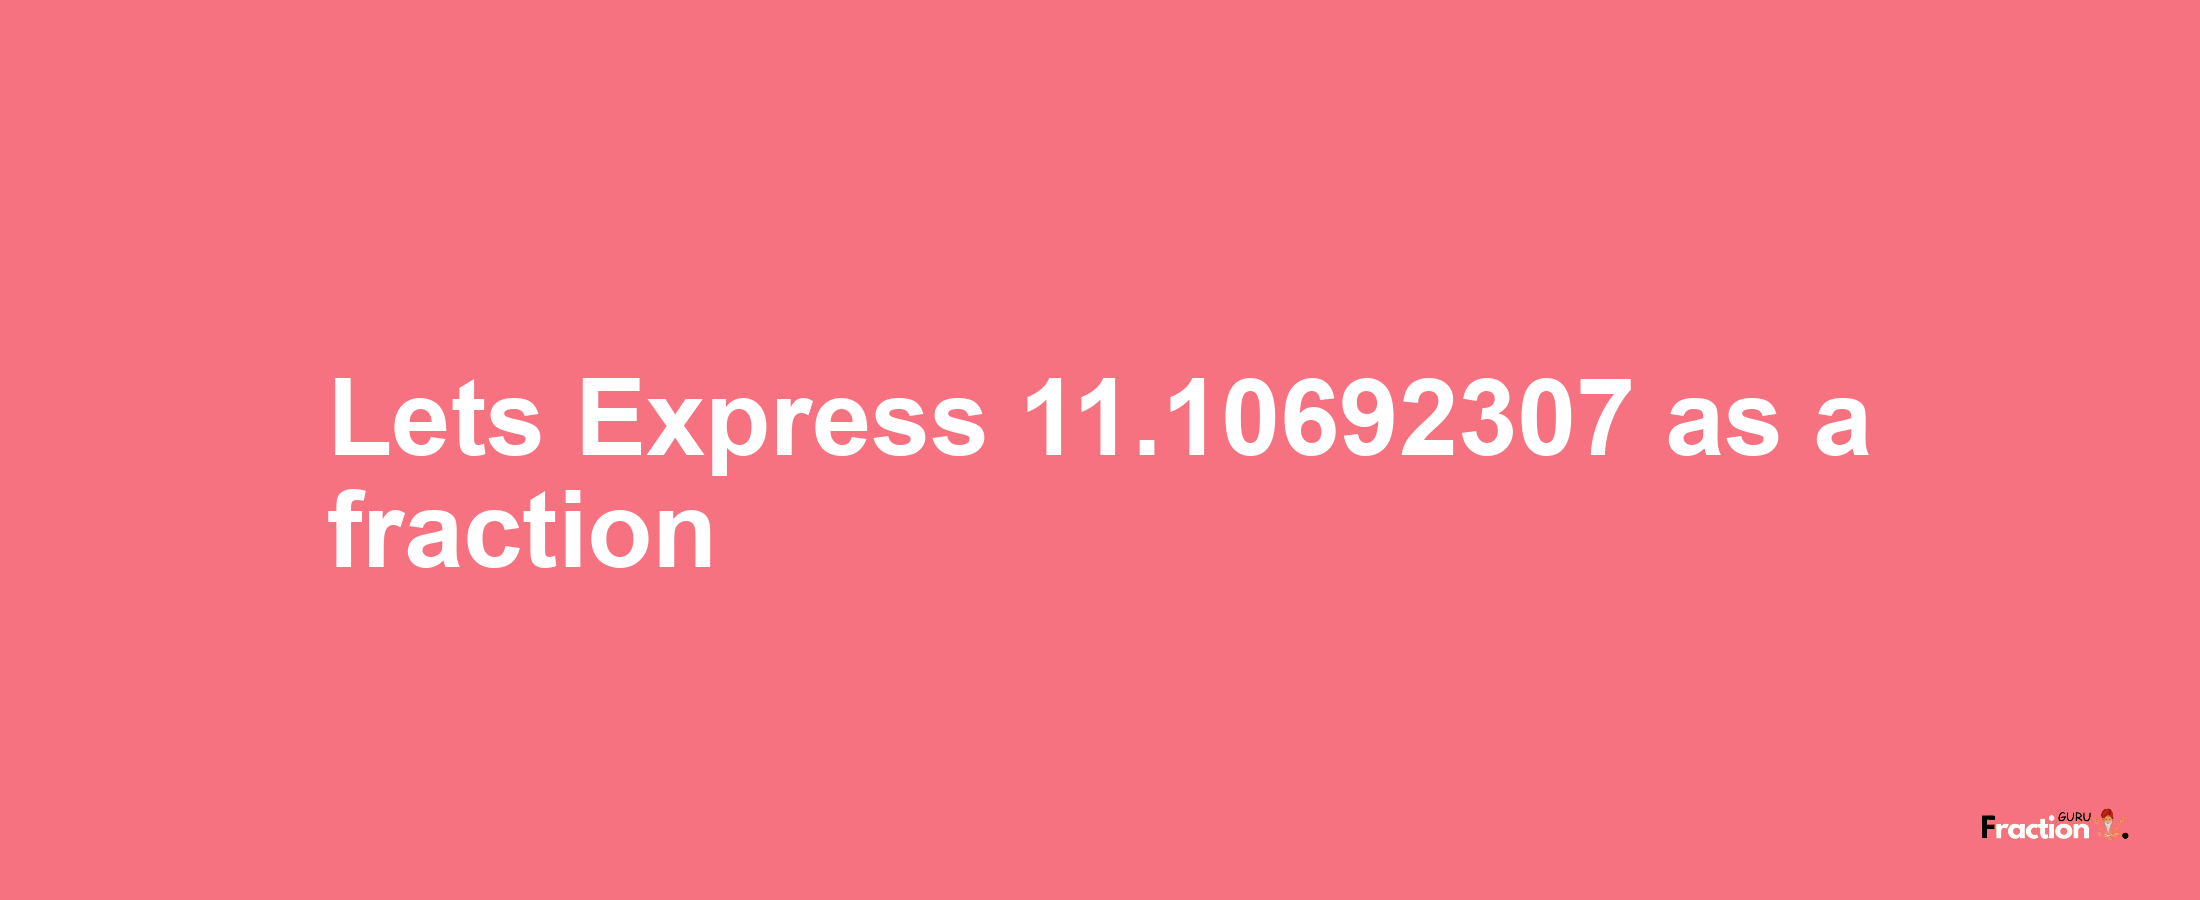 Lets Express 11.10692307 as afraction